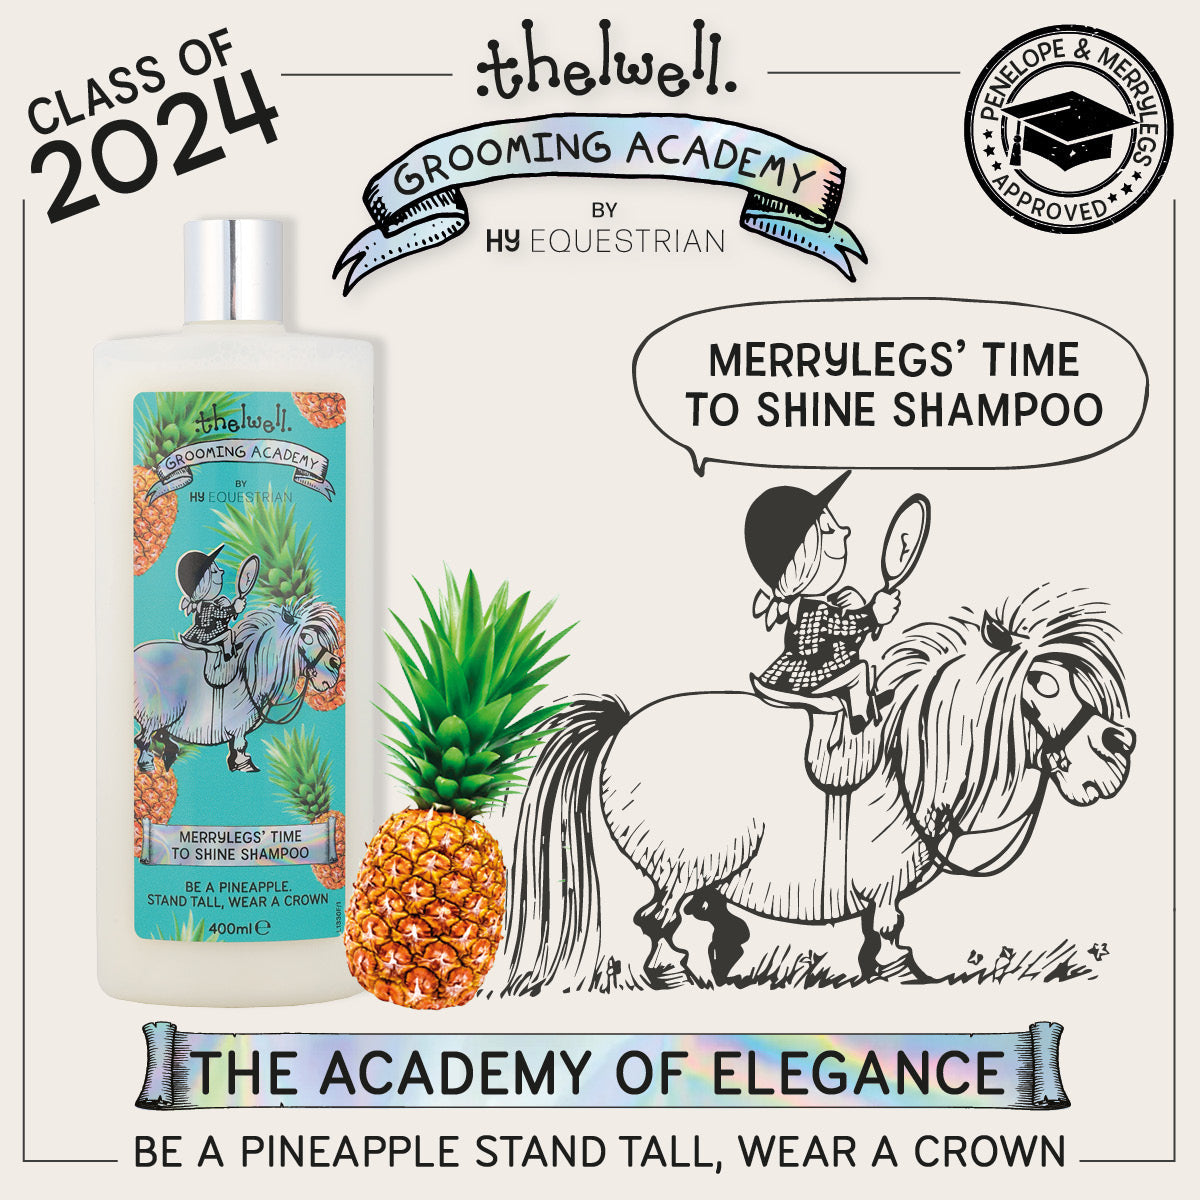 Thelwell Grooming Academy by Hy Equestrian - Merrylegs Time To Shine Shampoo